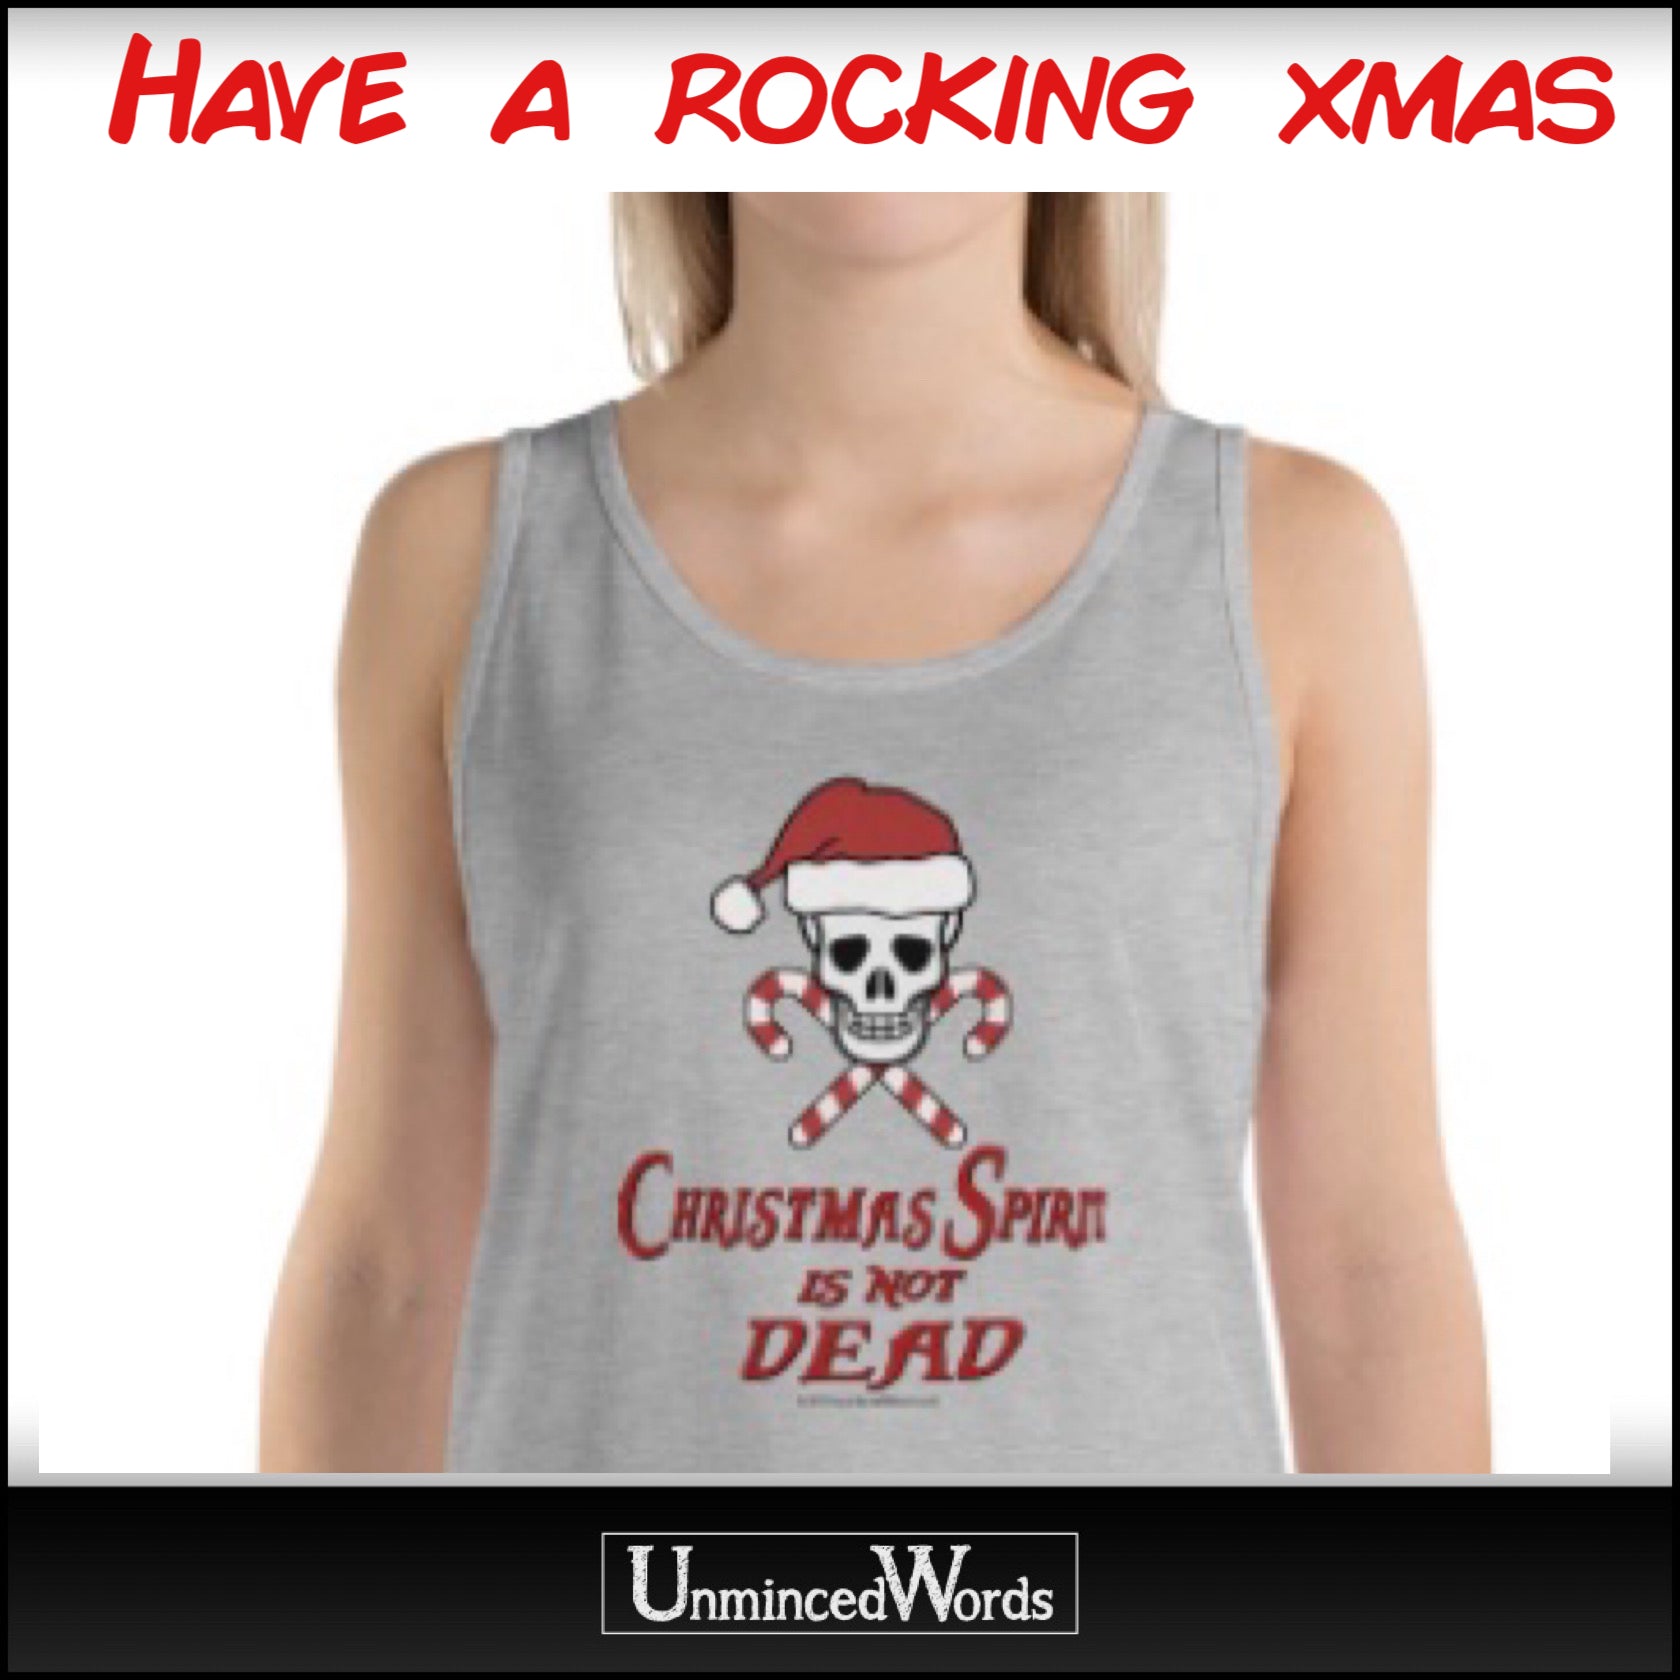 Have a rocking Christmas with this design